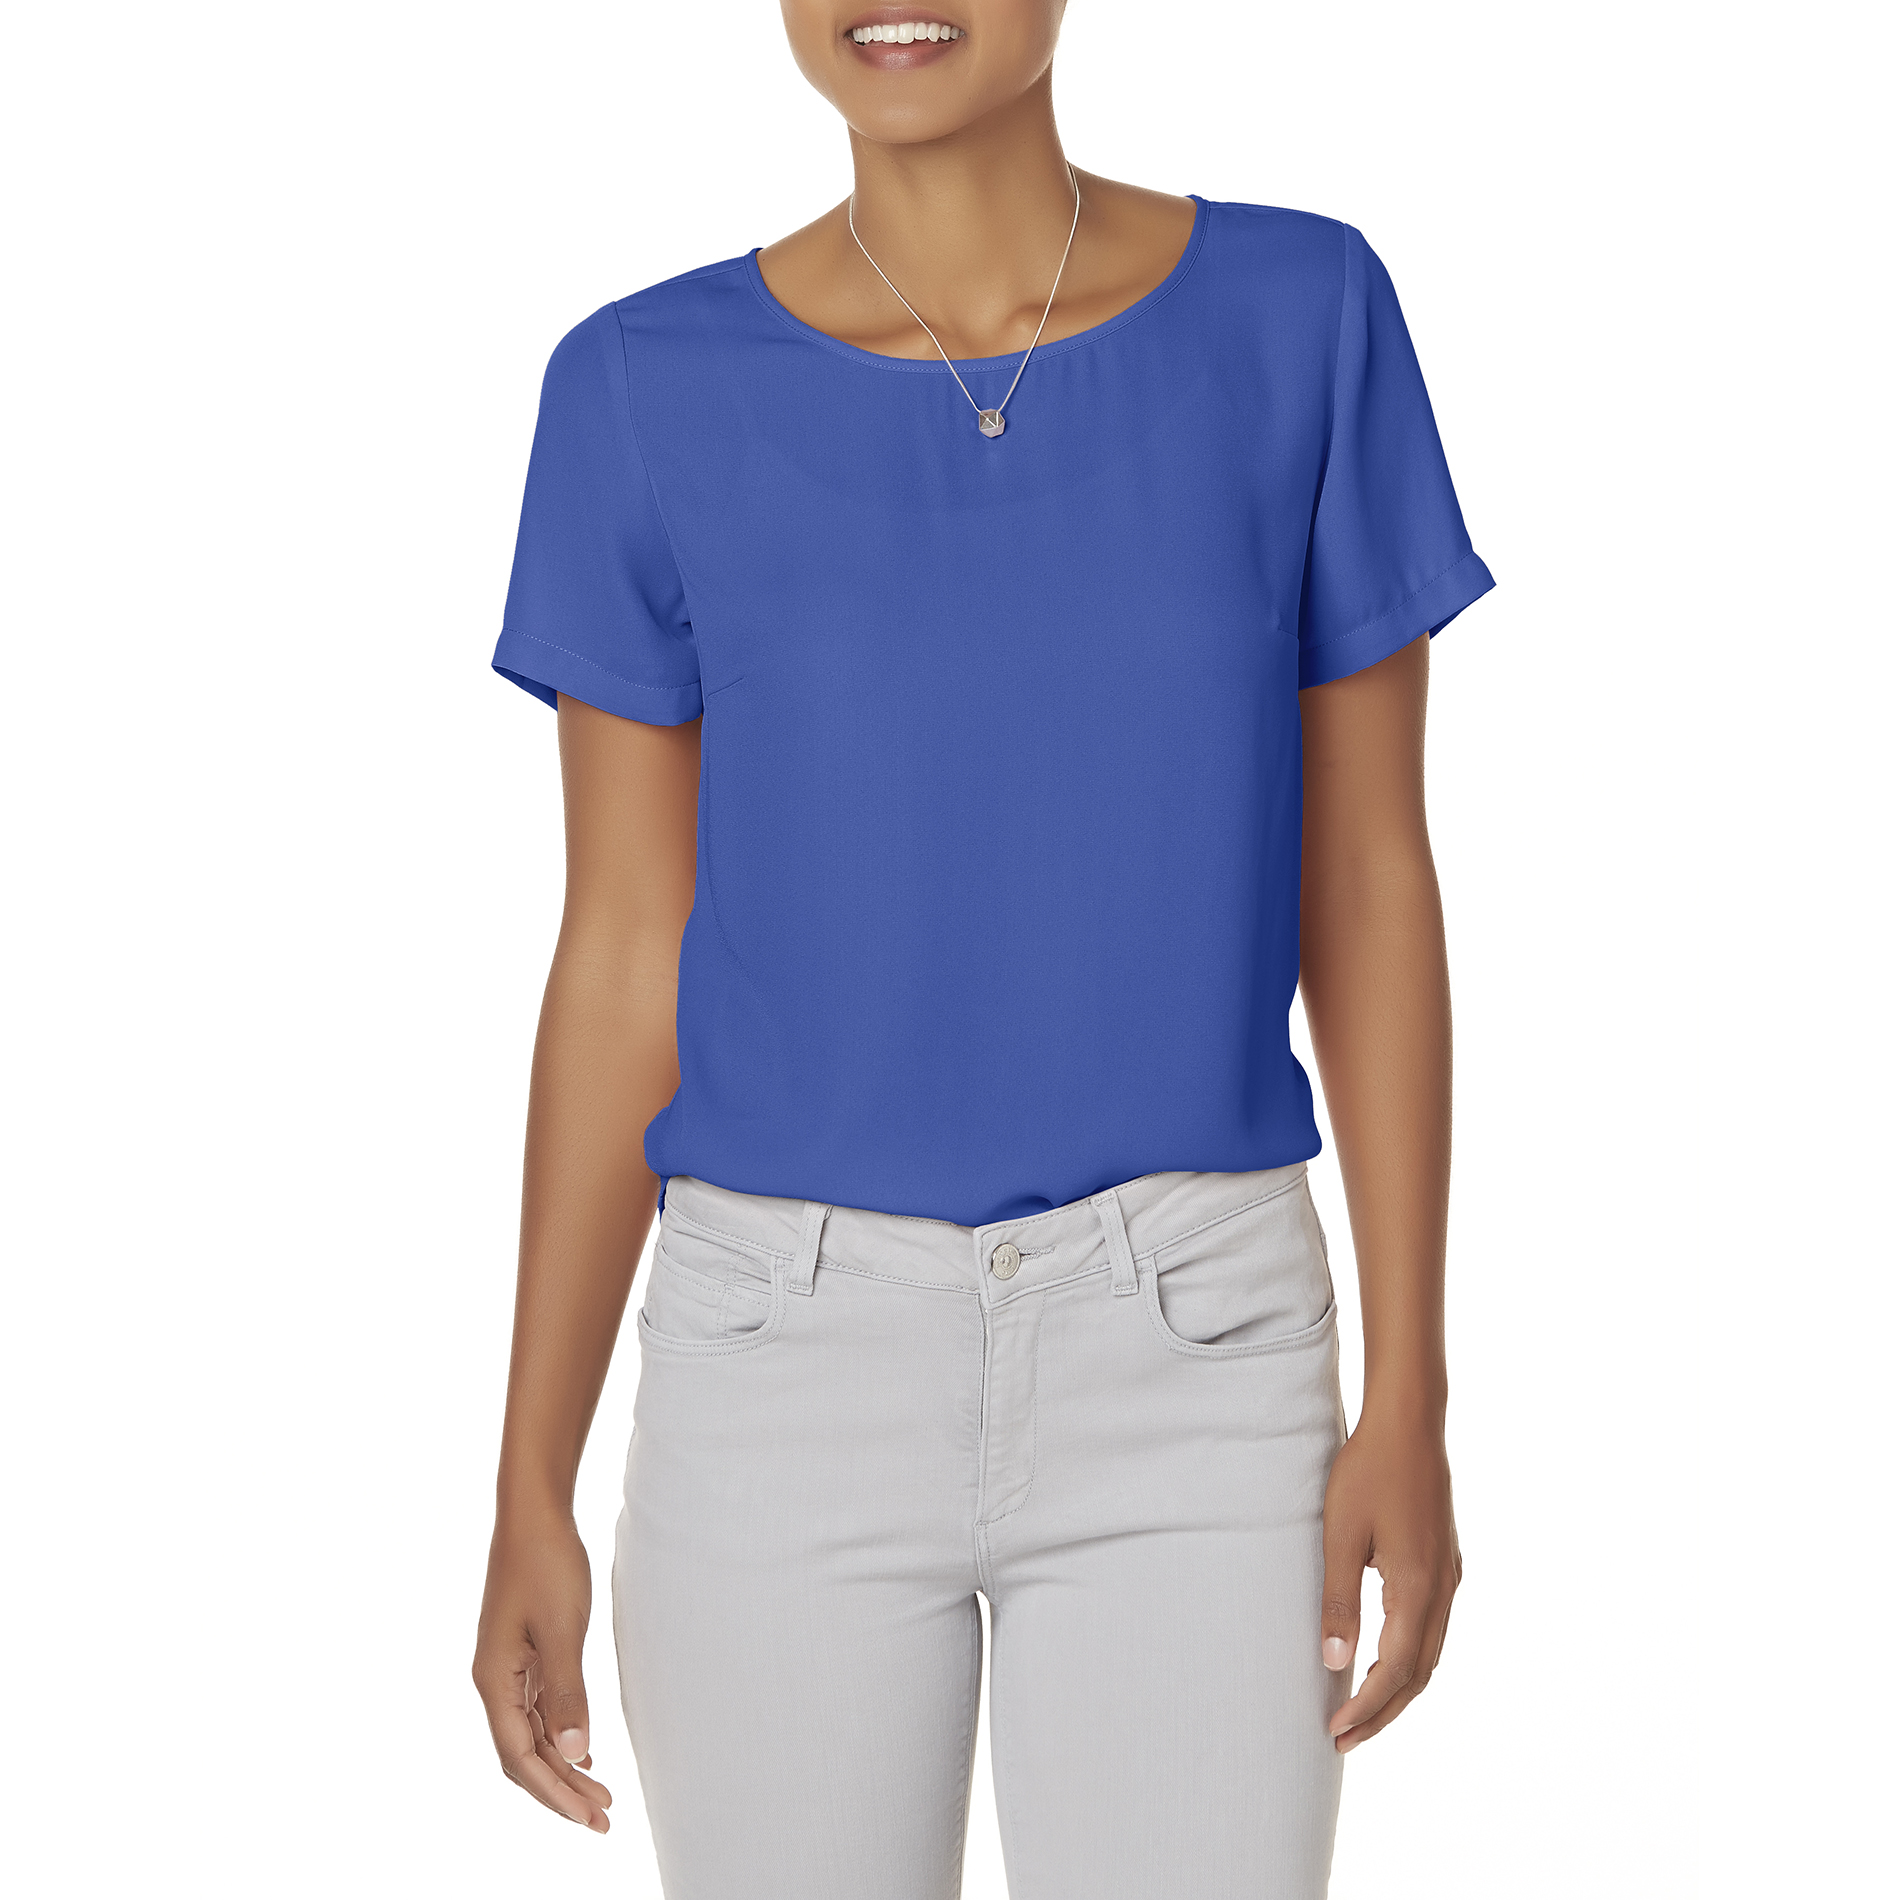 Simply Styled Women's Woven Top